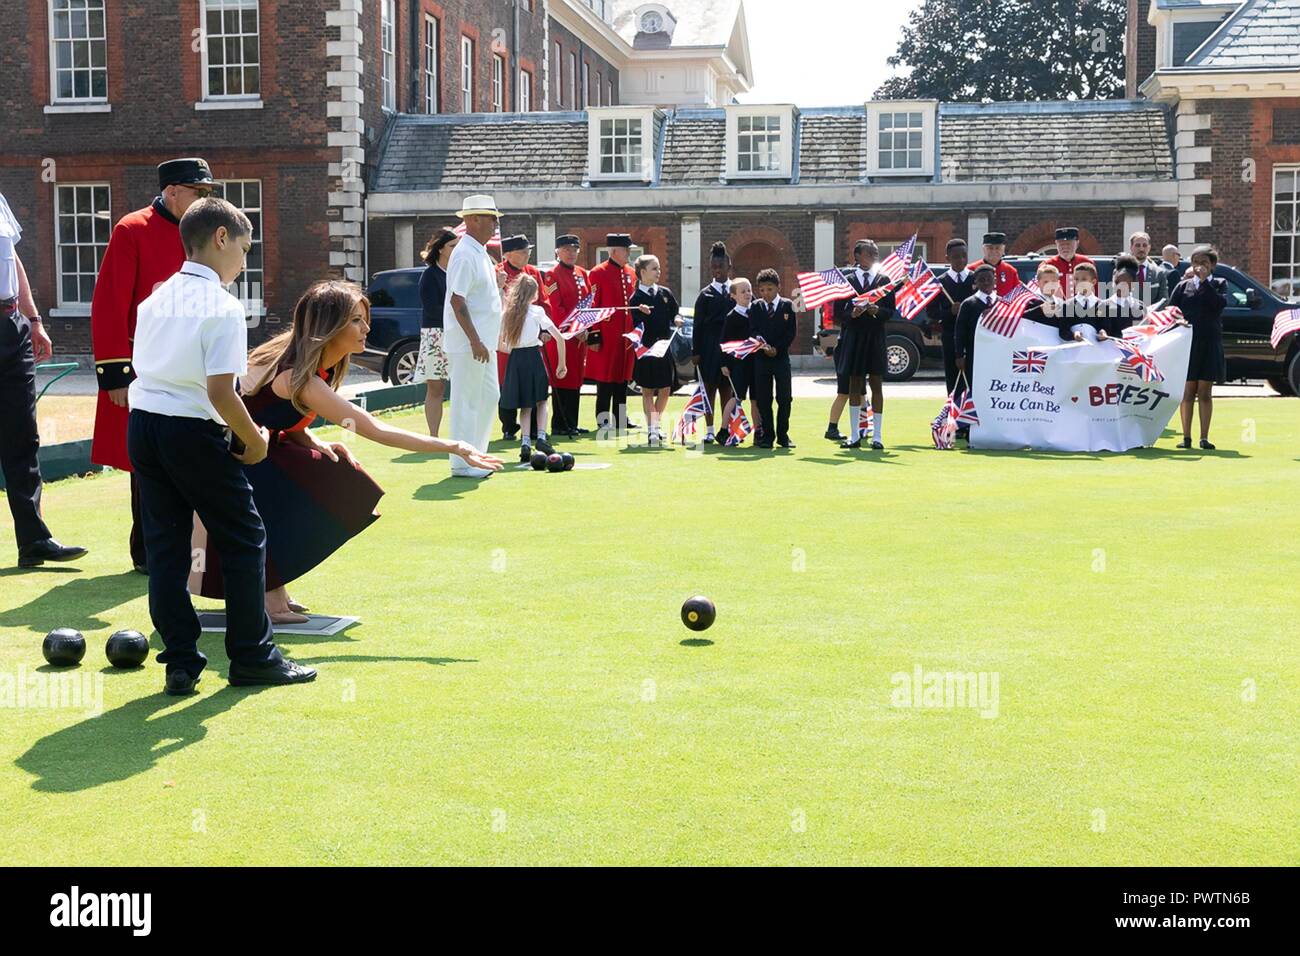 U.S First Lady Melania Trump tries her hand at bowls during a visit to the Royal Hospital Chelsea July 13, 2018 in London, United Kingdom. Stock Photo